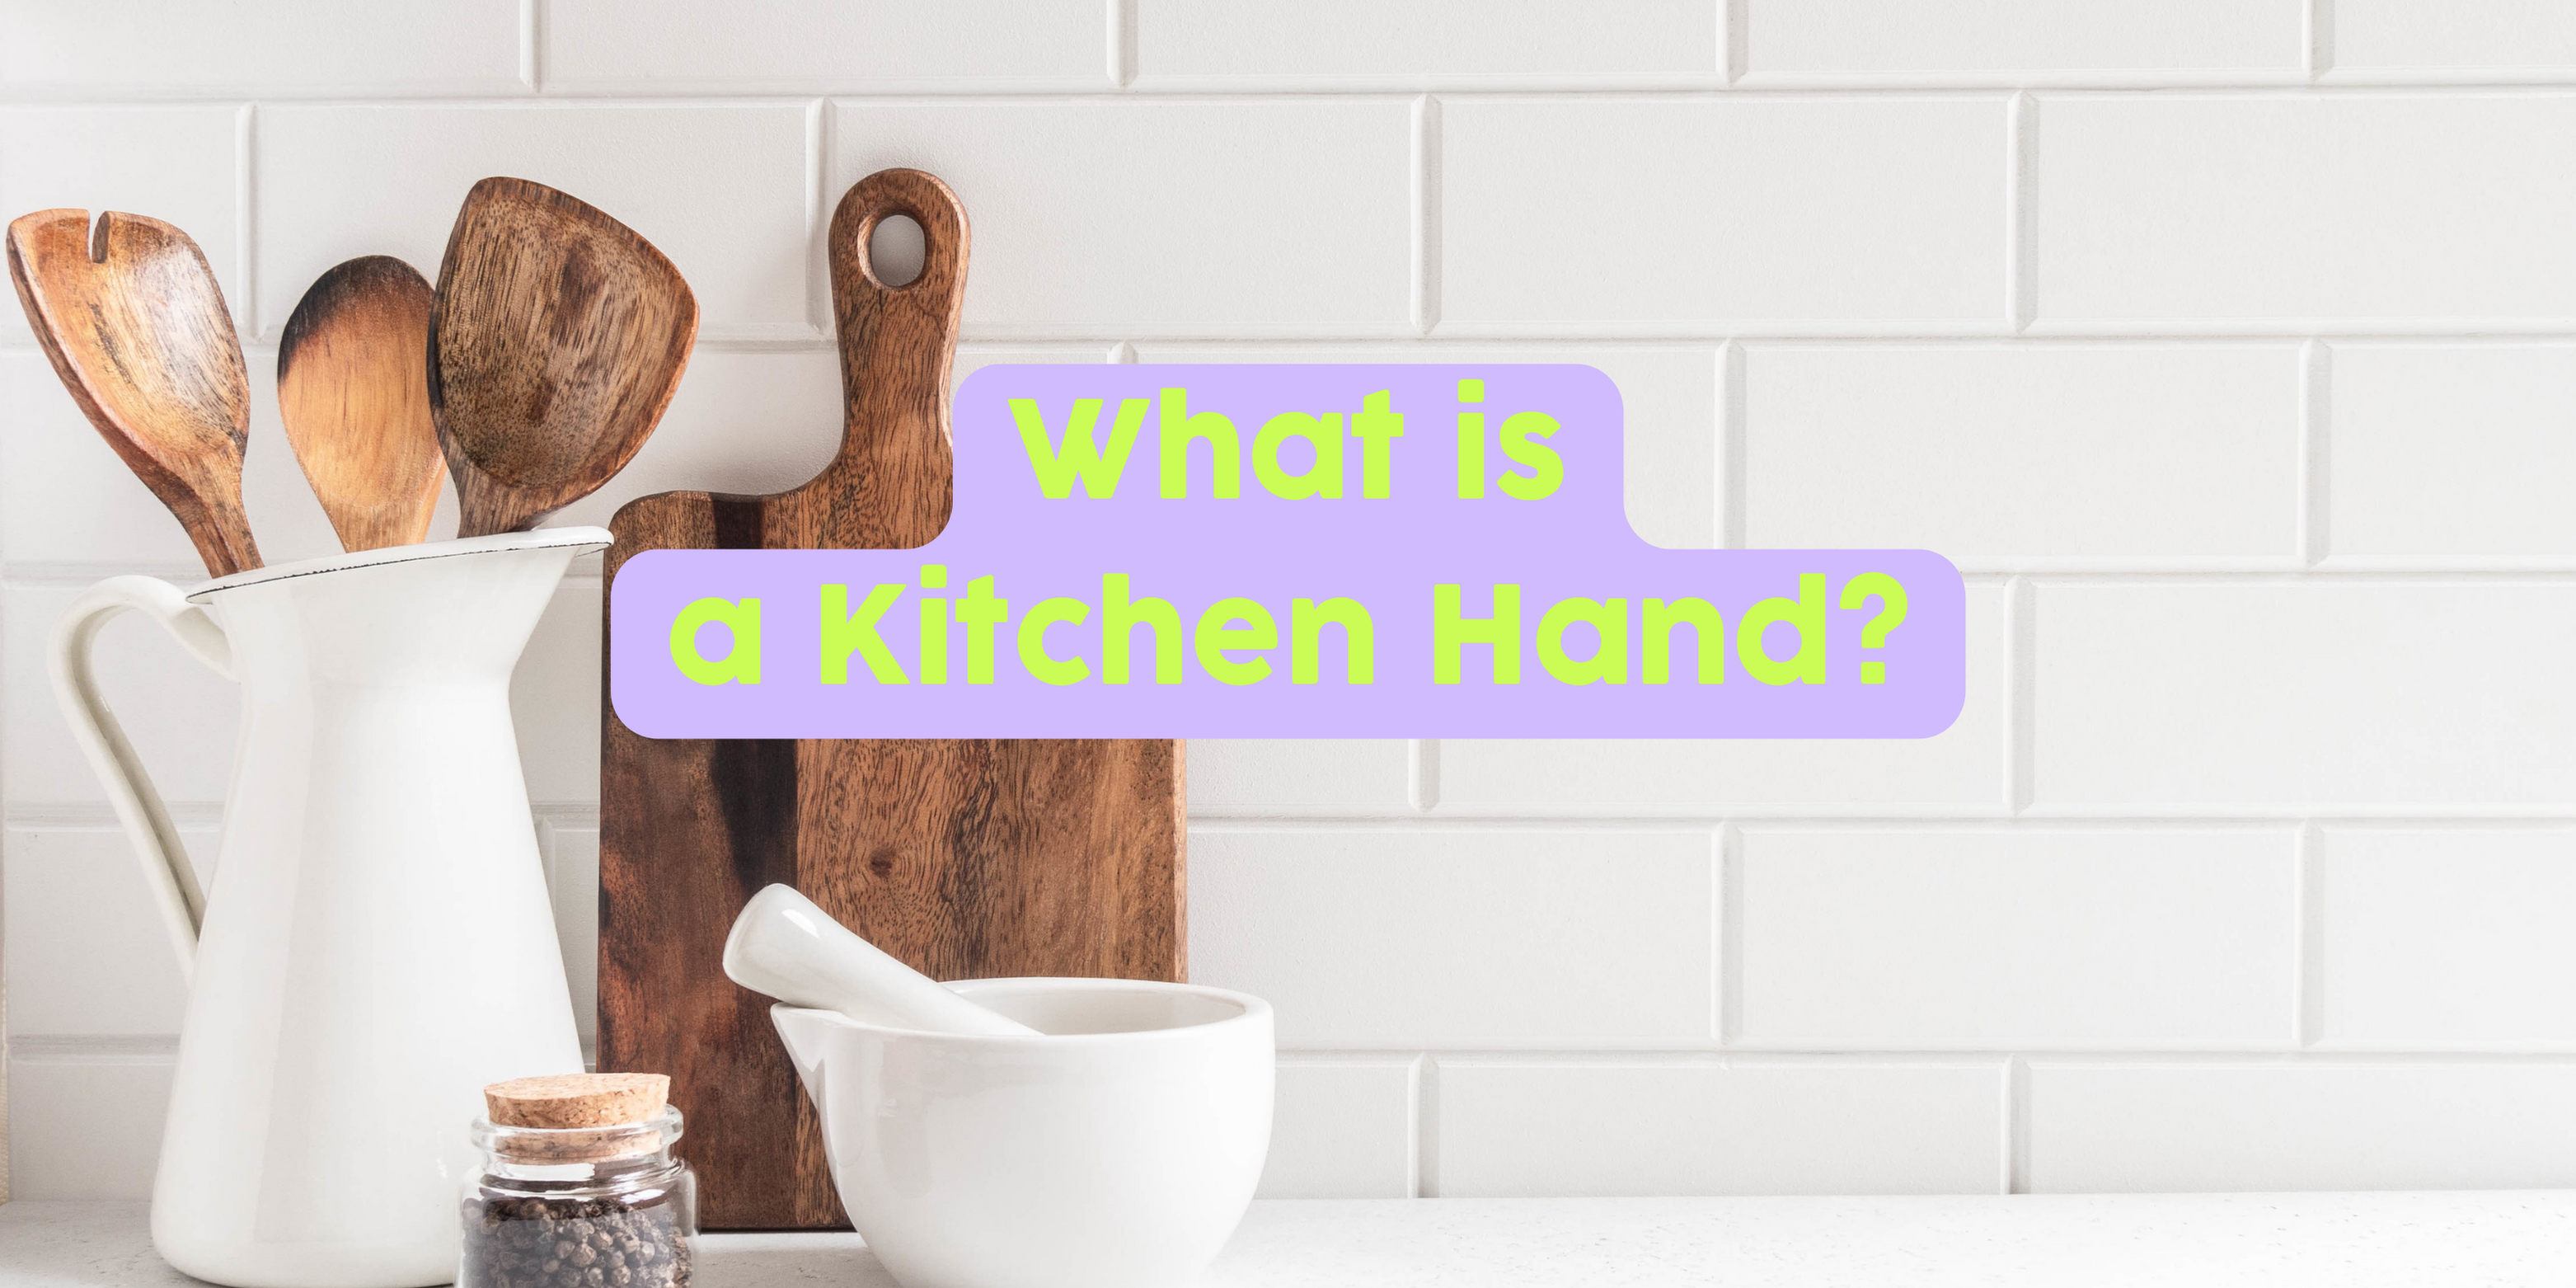 What is a kitchen hand?